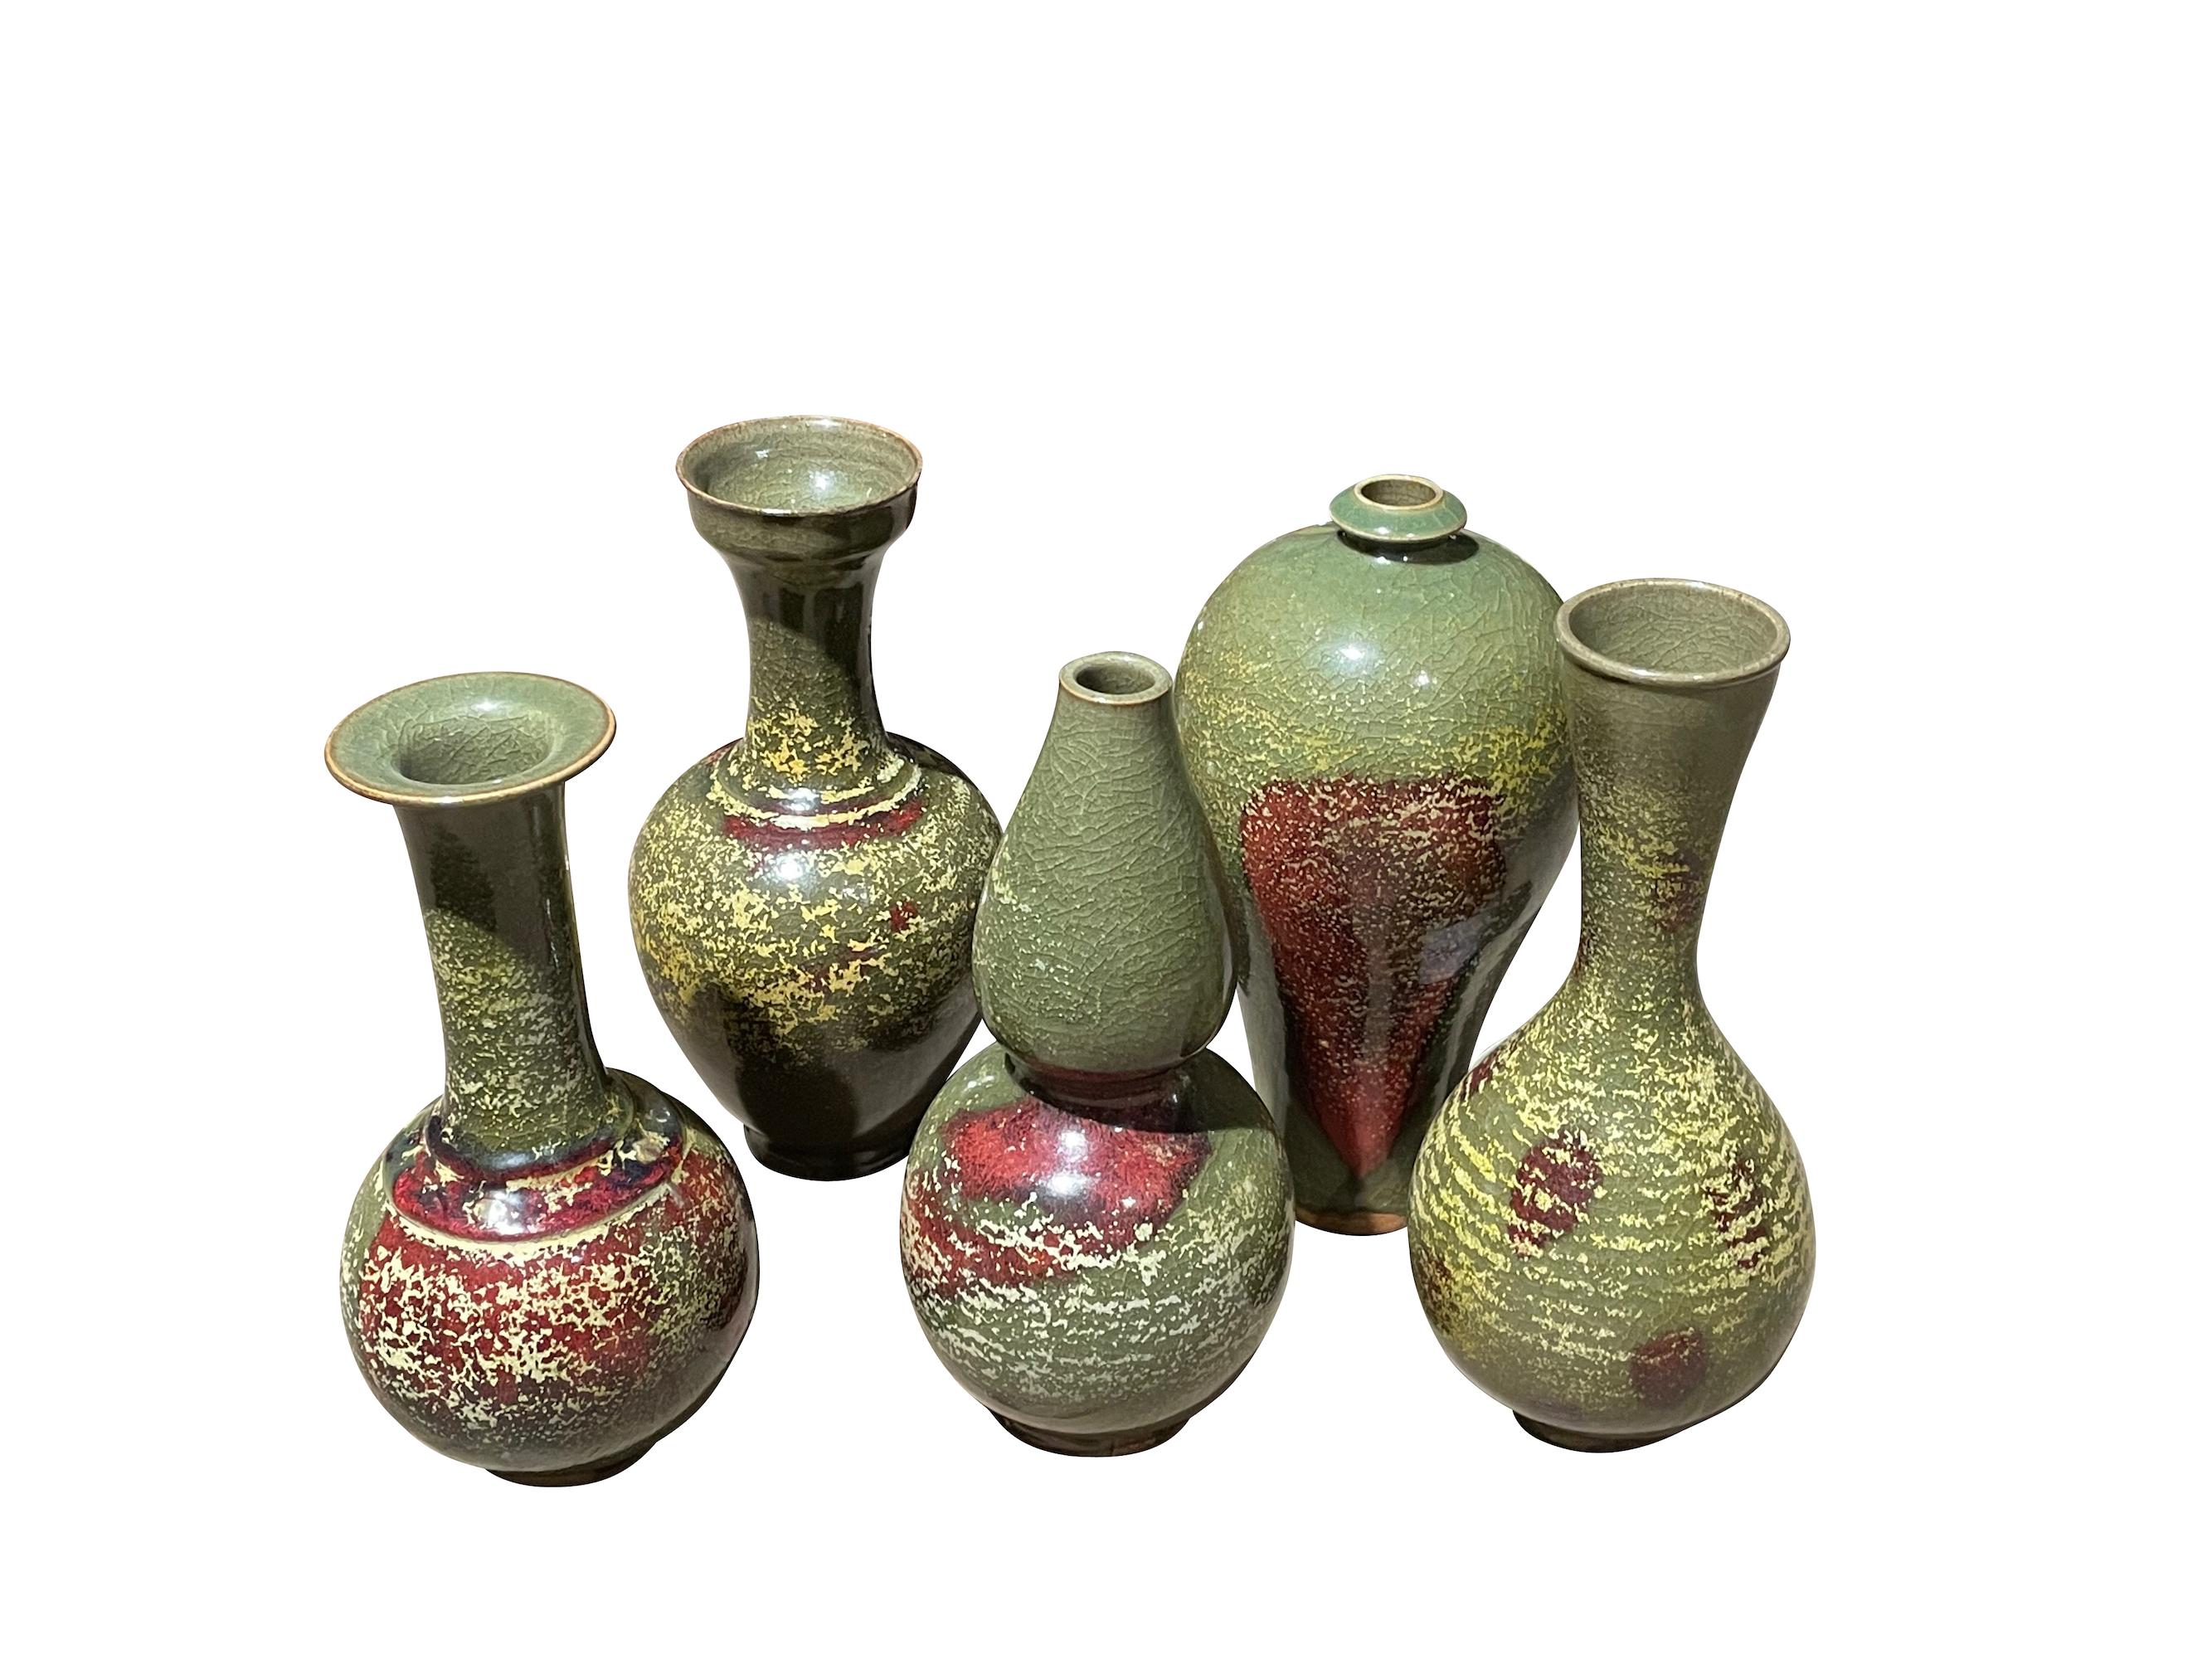 Contemporary Chinese gourd shape vase.
Olive glaze with burgundy accent.
From a collection of same colorways in different shapes and sizes.